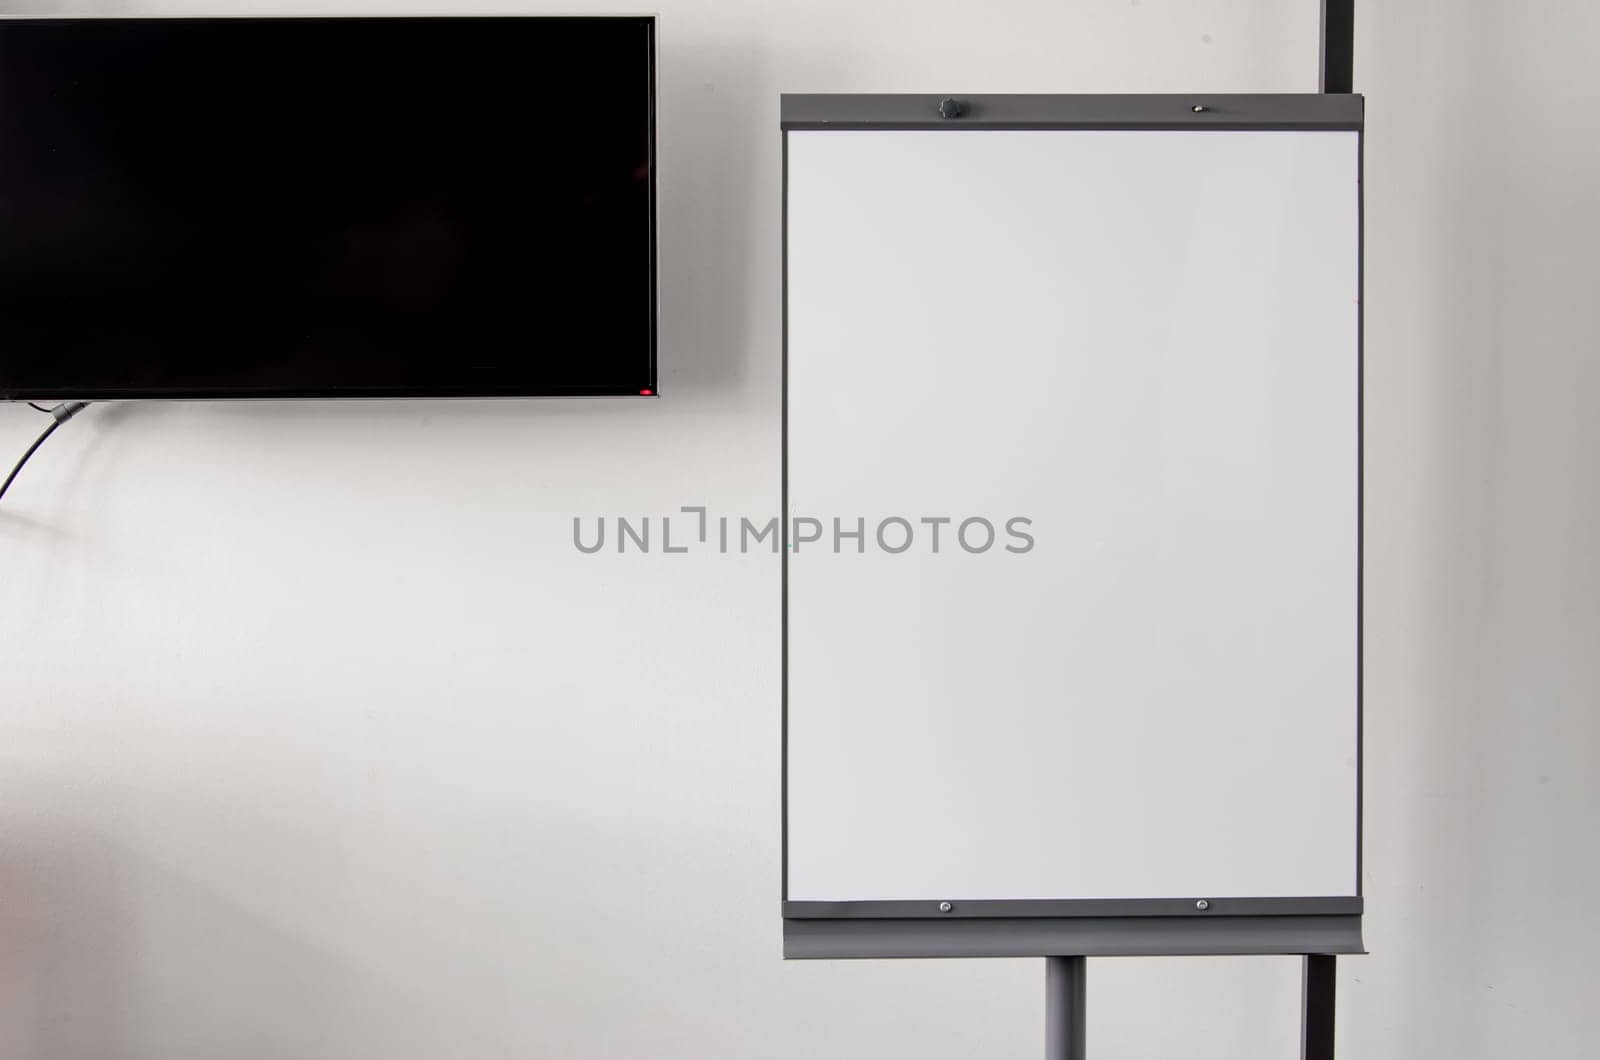 White board or flipchart on white wall background. Background, place for text, copy space.